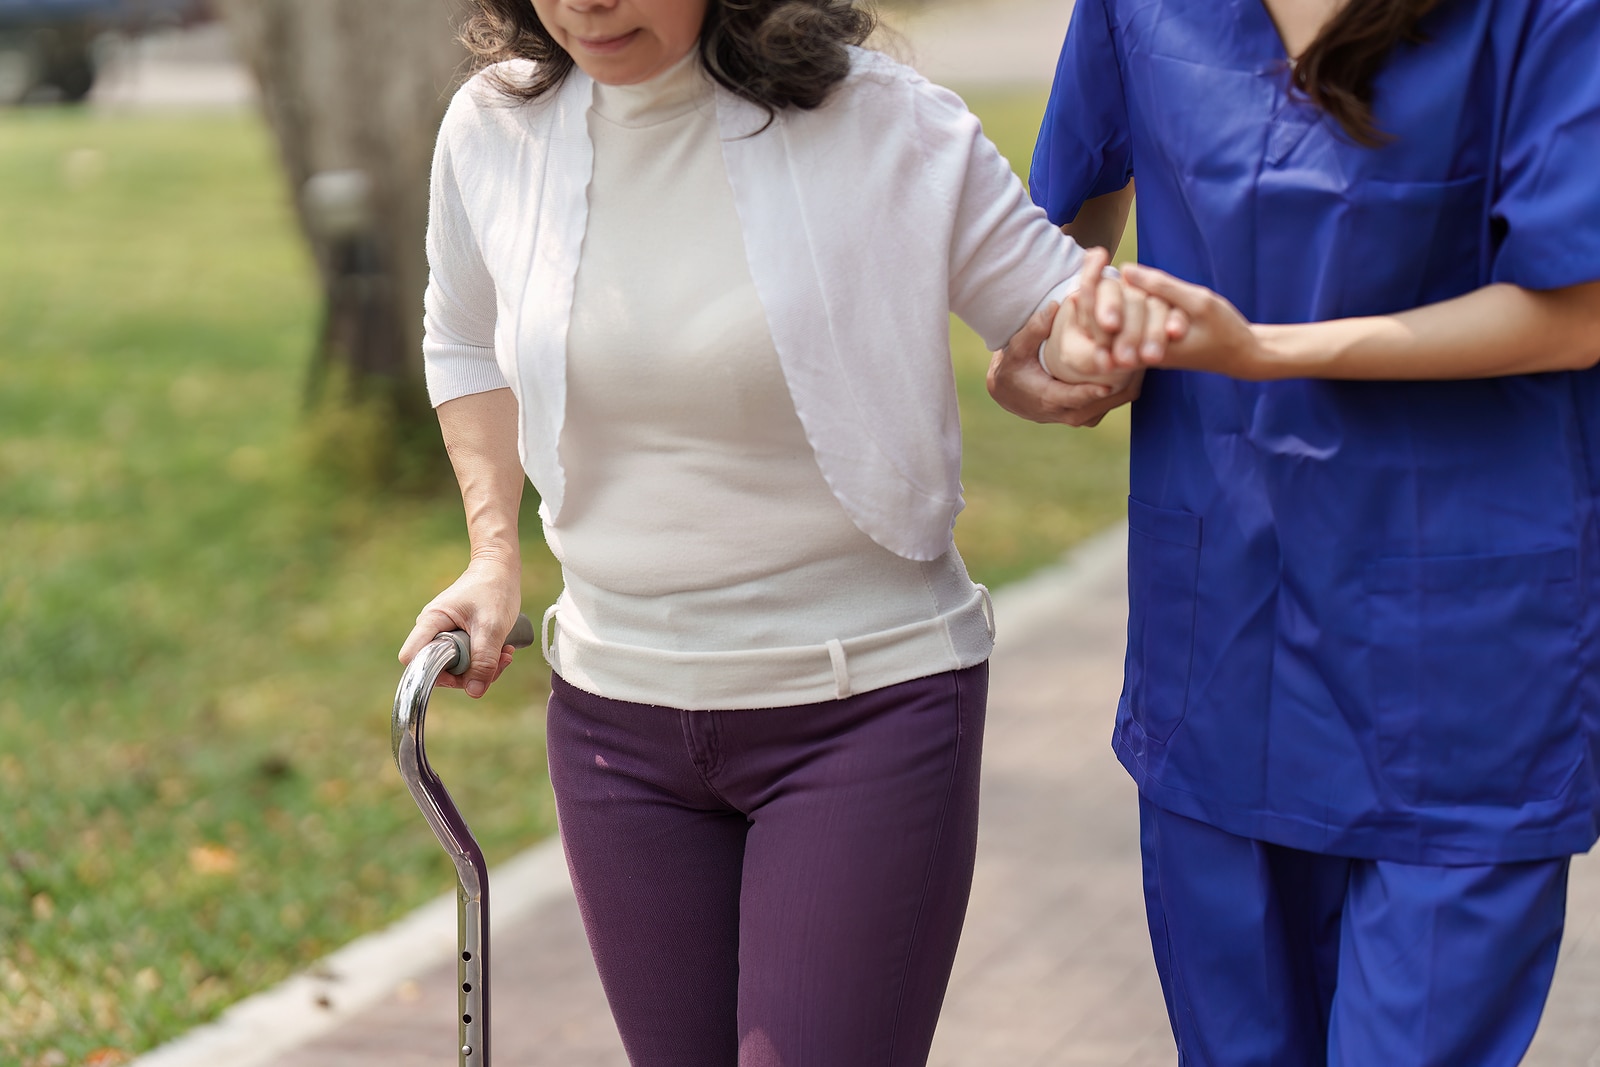 Home Care in Asheboro by TenderHearted Home Care